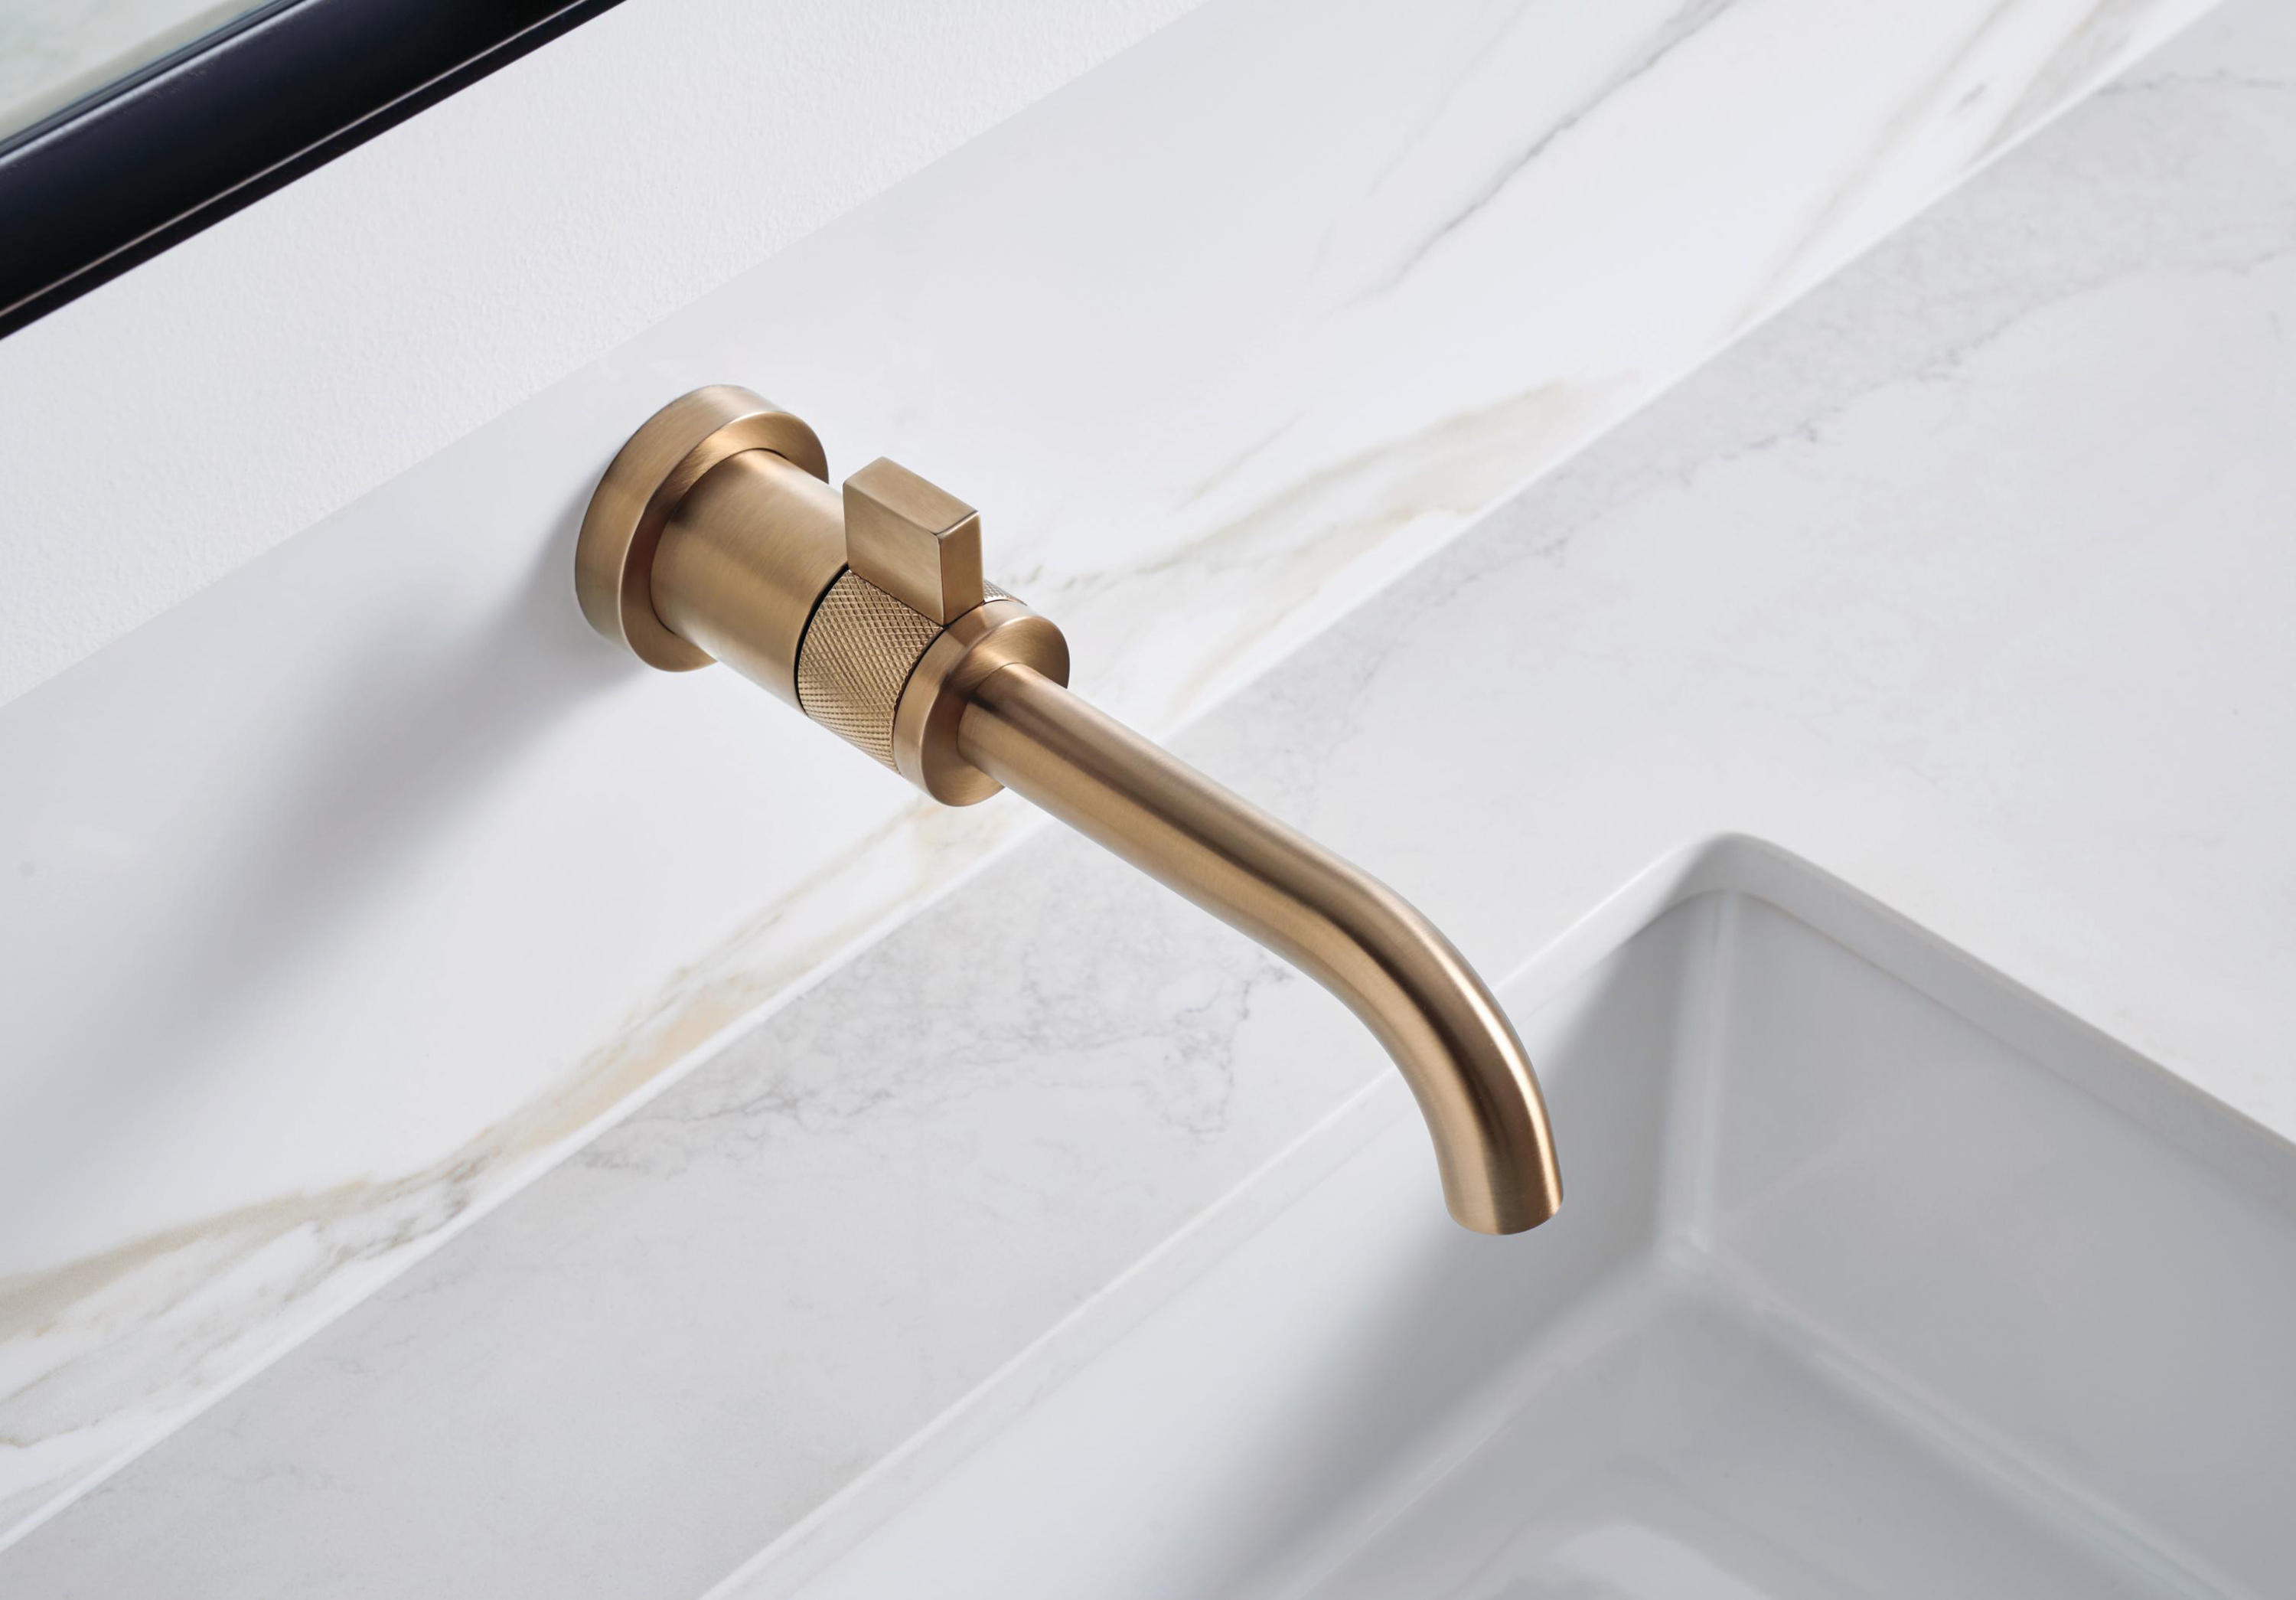 LITZE Widespread Lavatory Lever Handle Kit, Luxe Gold